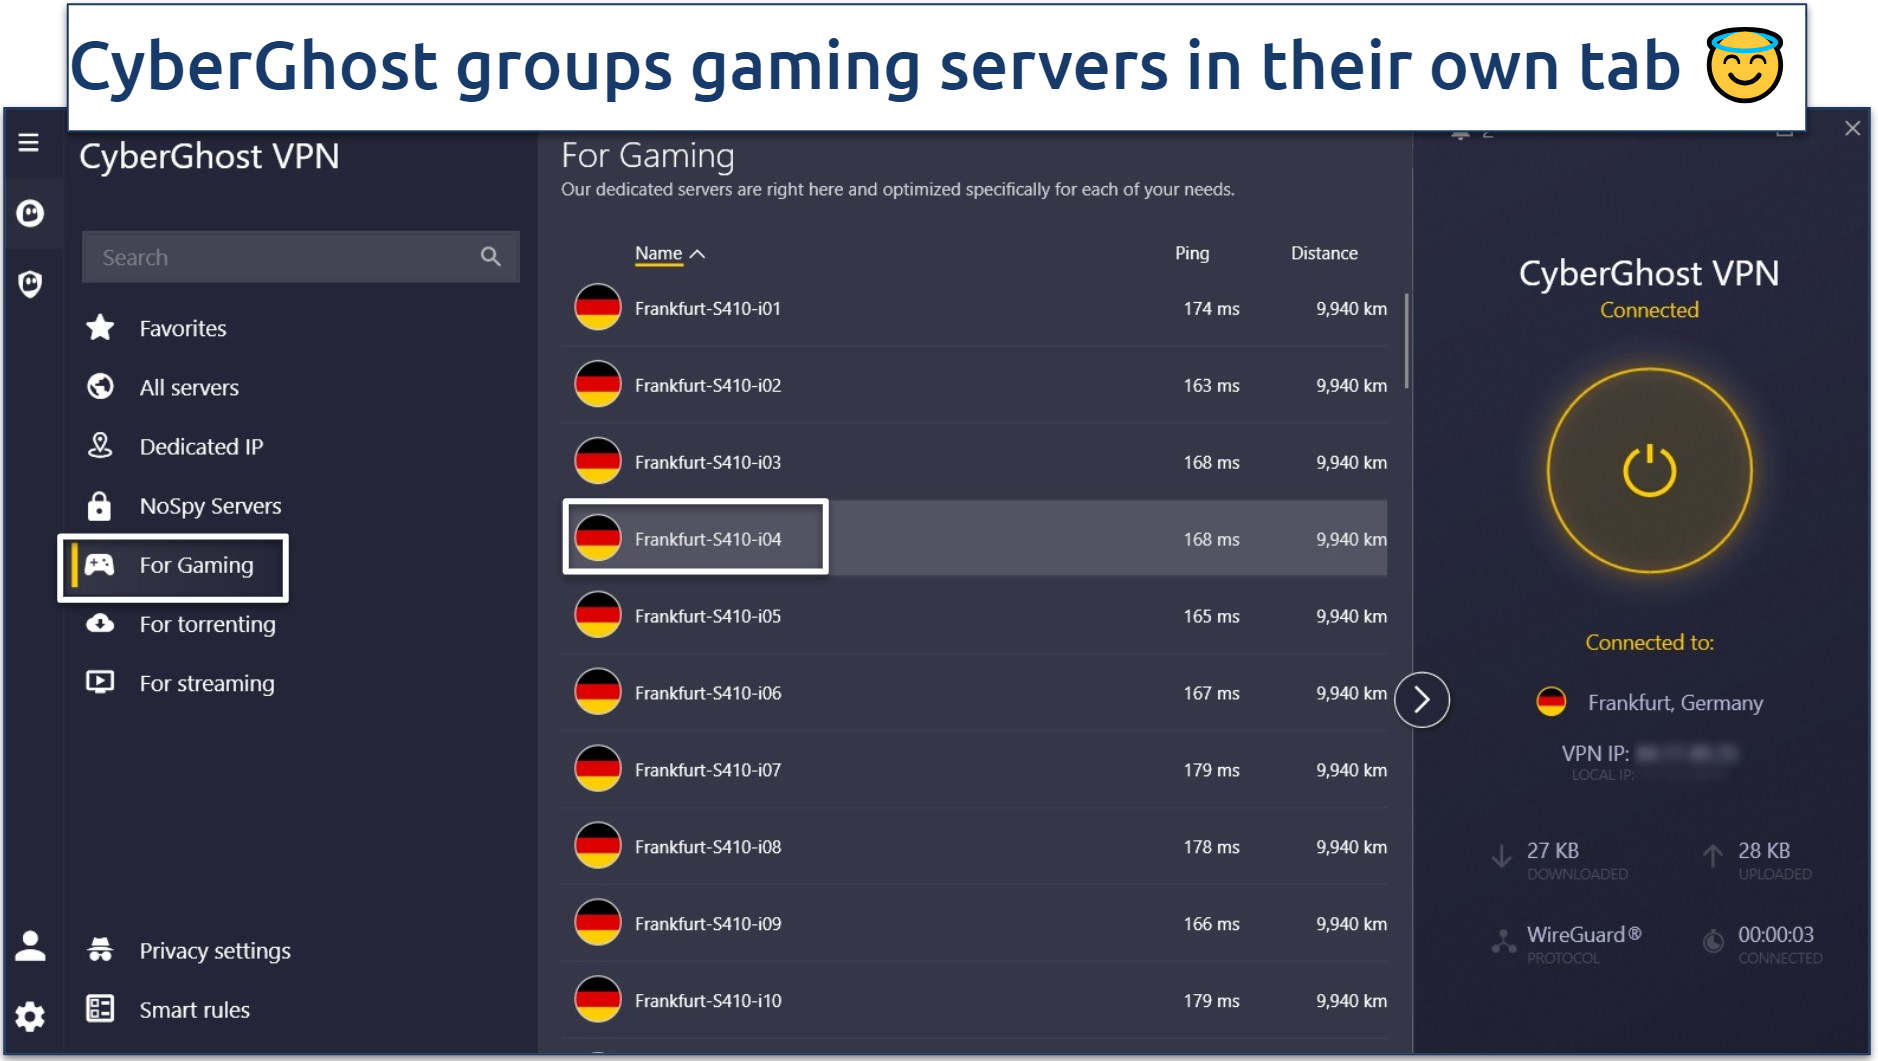 A screenshot of the CyberGhost app dashboard showing its gaming servers with their ping and distance information.